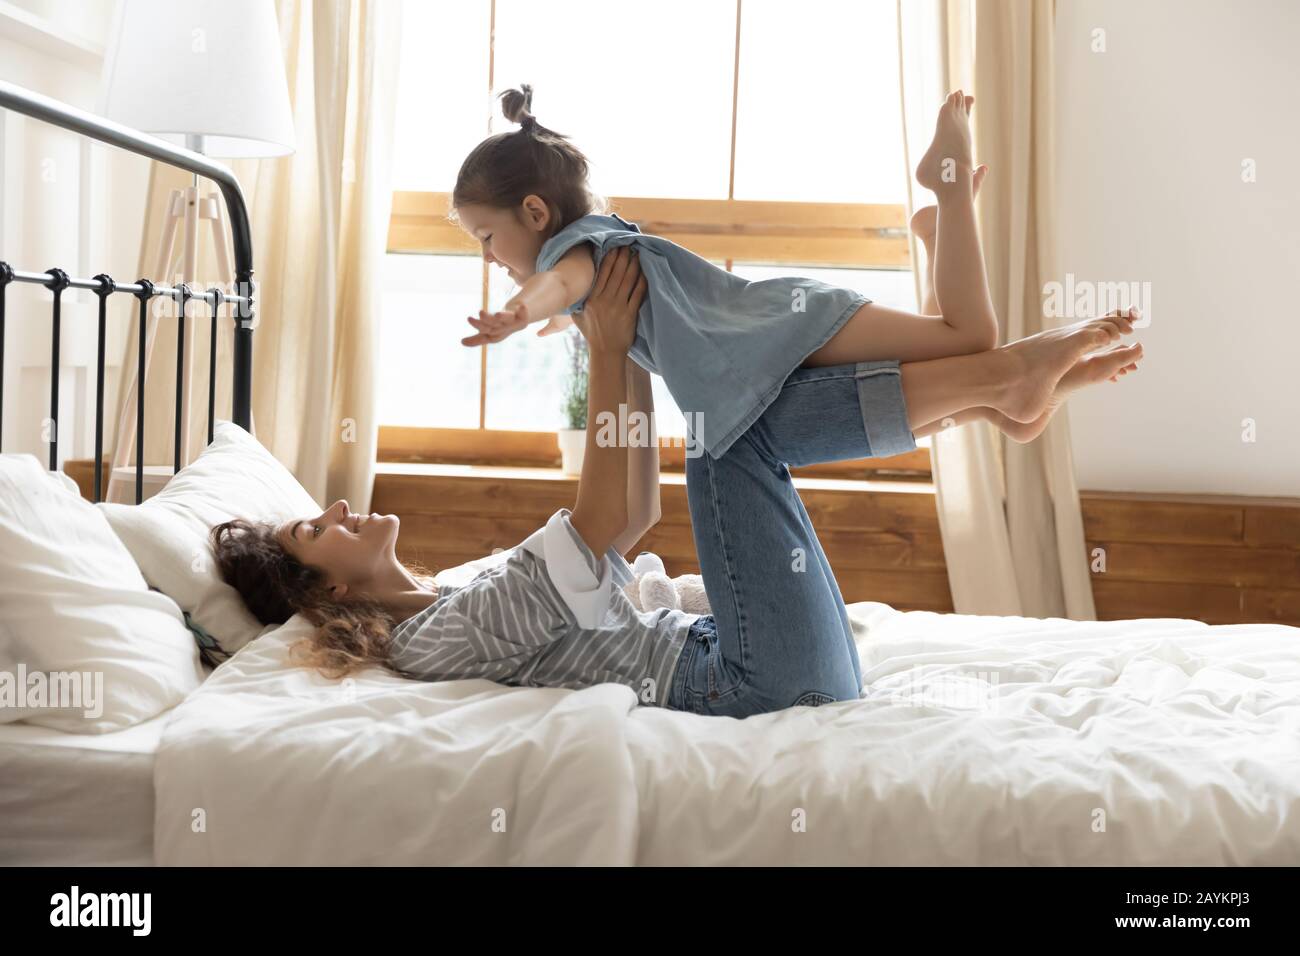 Happy young mother lifting little preschool child daughter in bedroom. Stock Photo